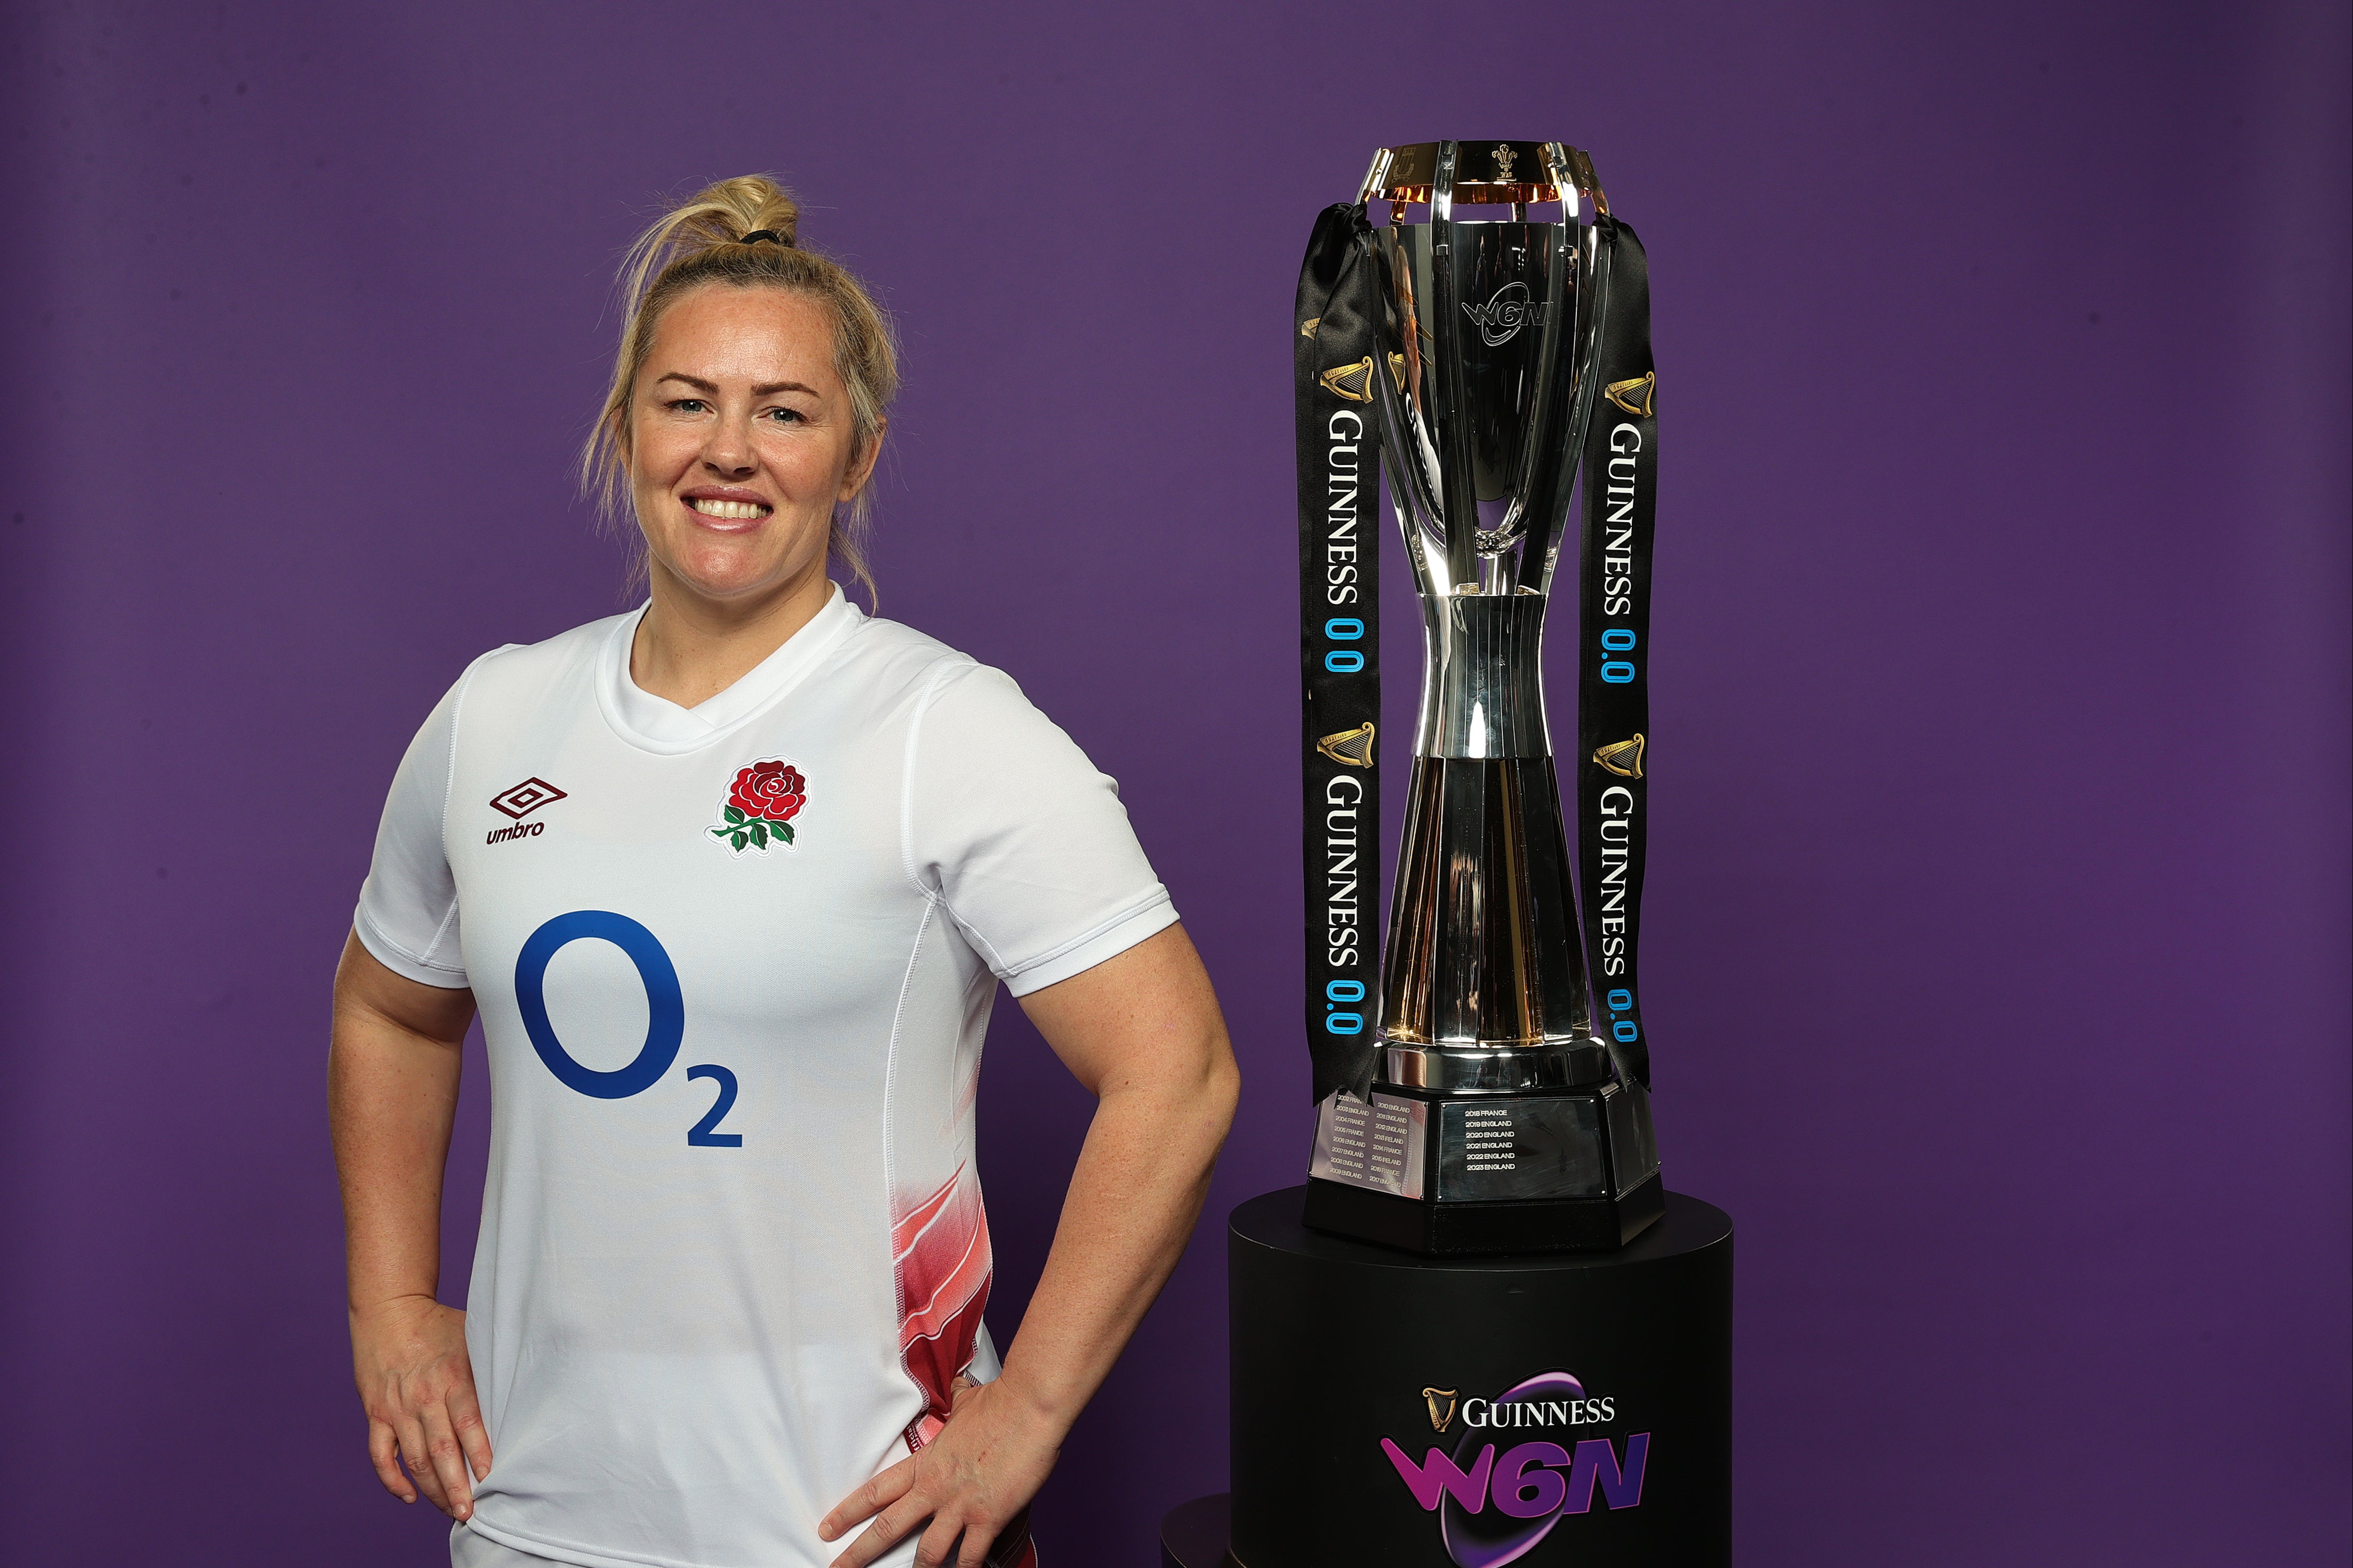 Marlie Packer is the reigning World Rugby Player of the Year